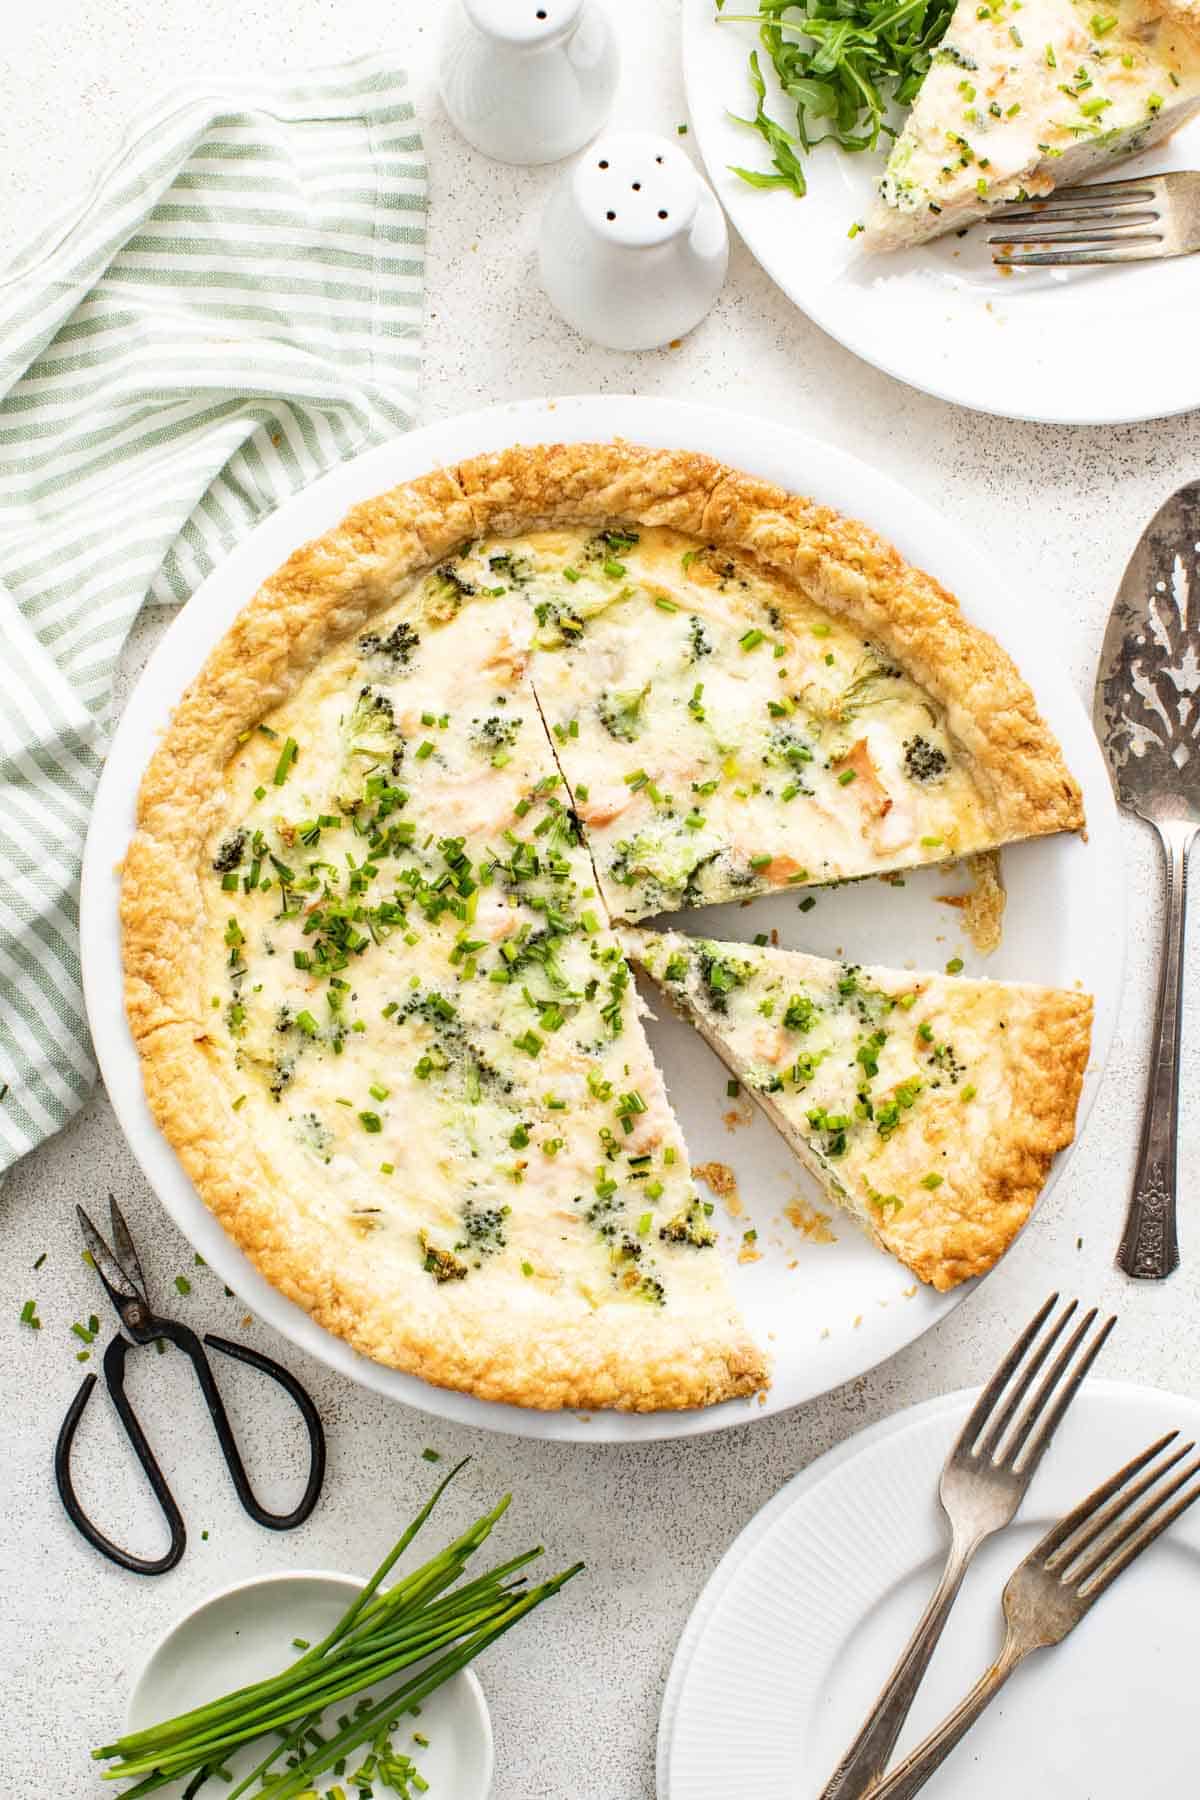 A salmon quiche with broccoli and chives in a white pie plate.